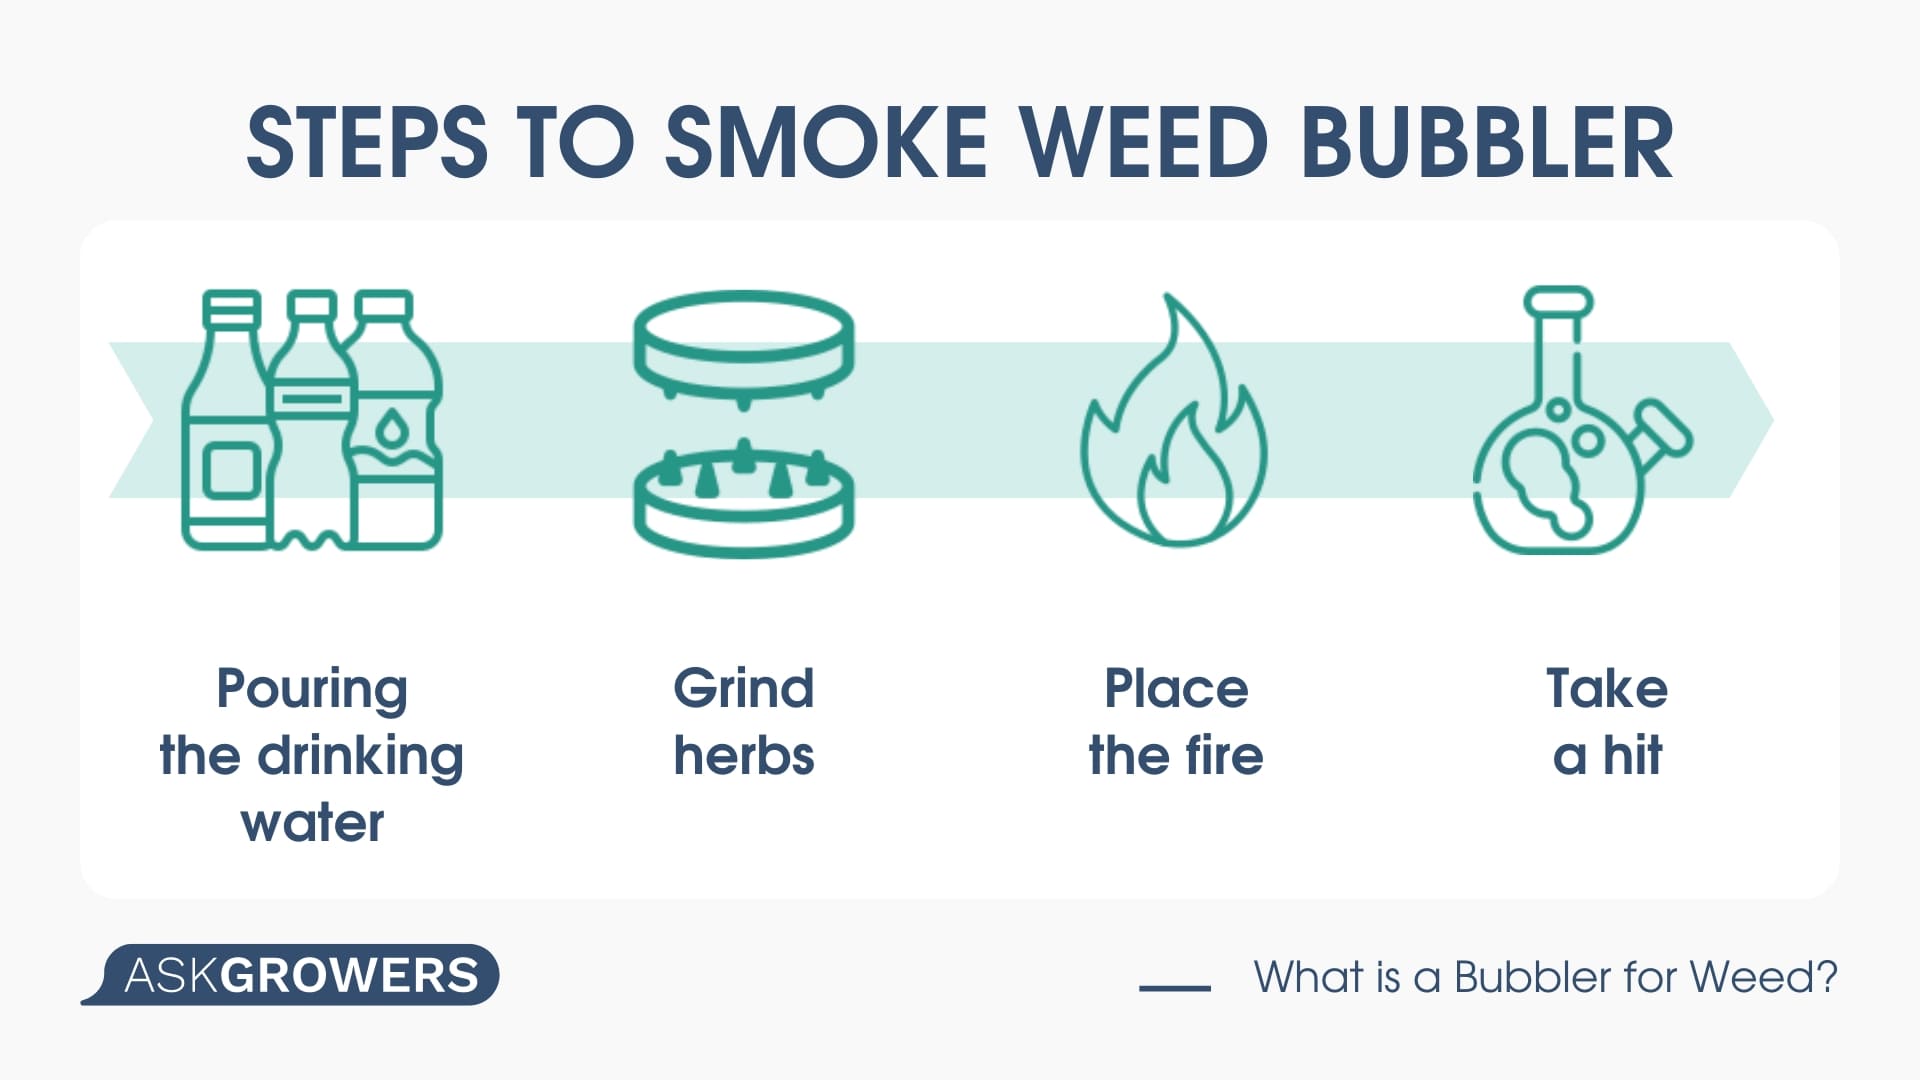 What is a Bubbler for Weed